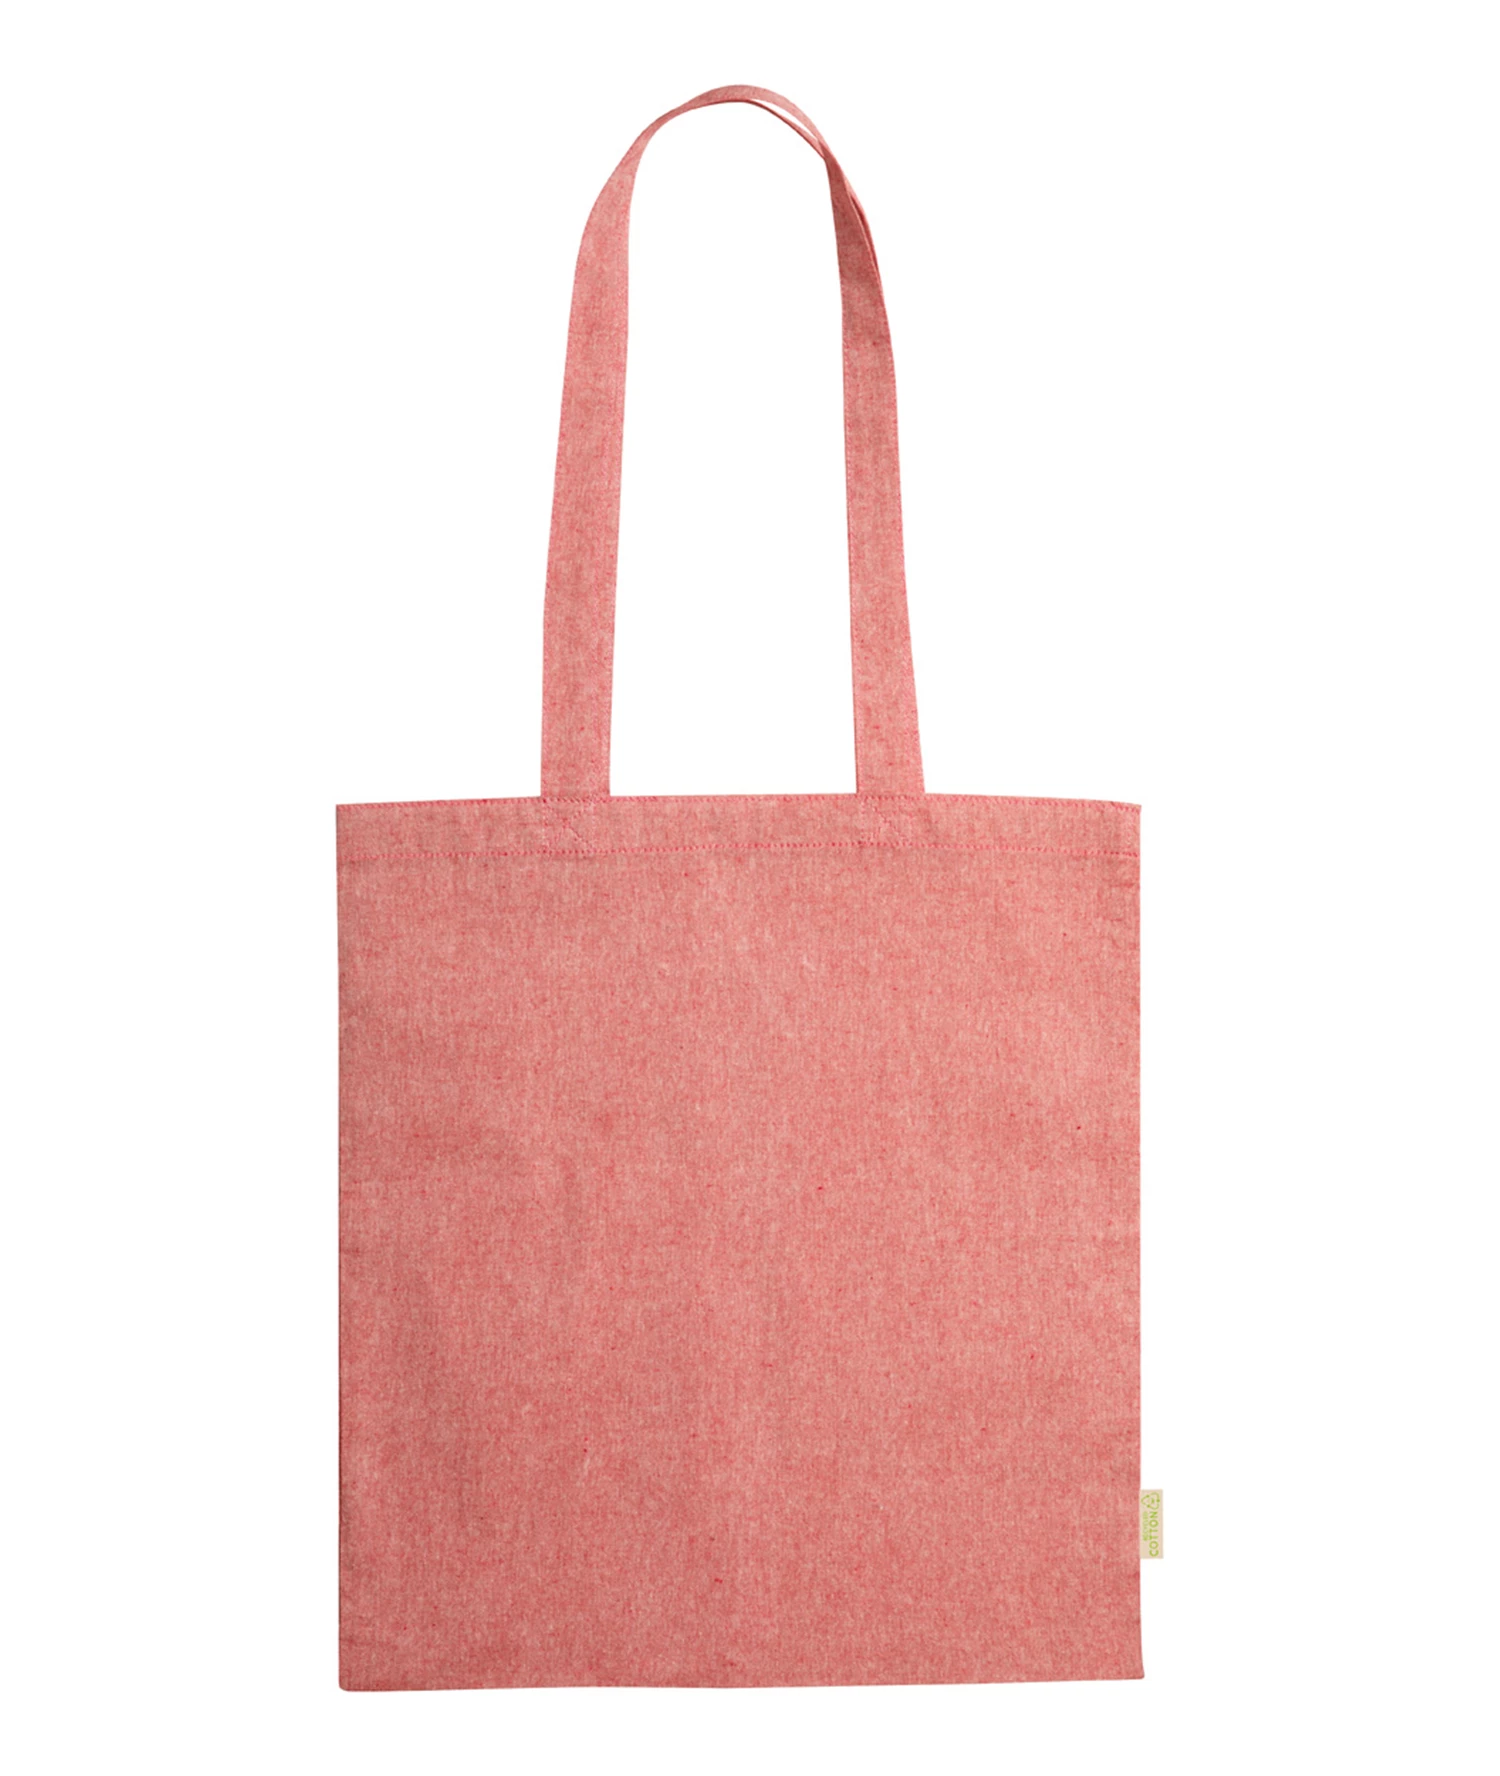 Pink Cotton Tote Reusable Carrier Bag